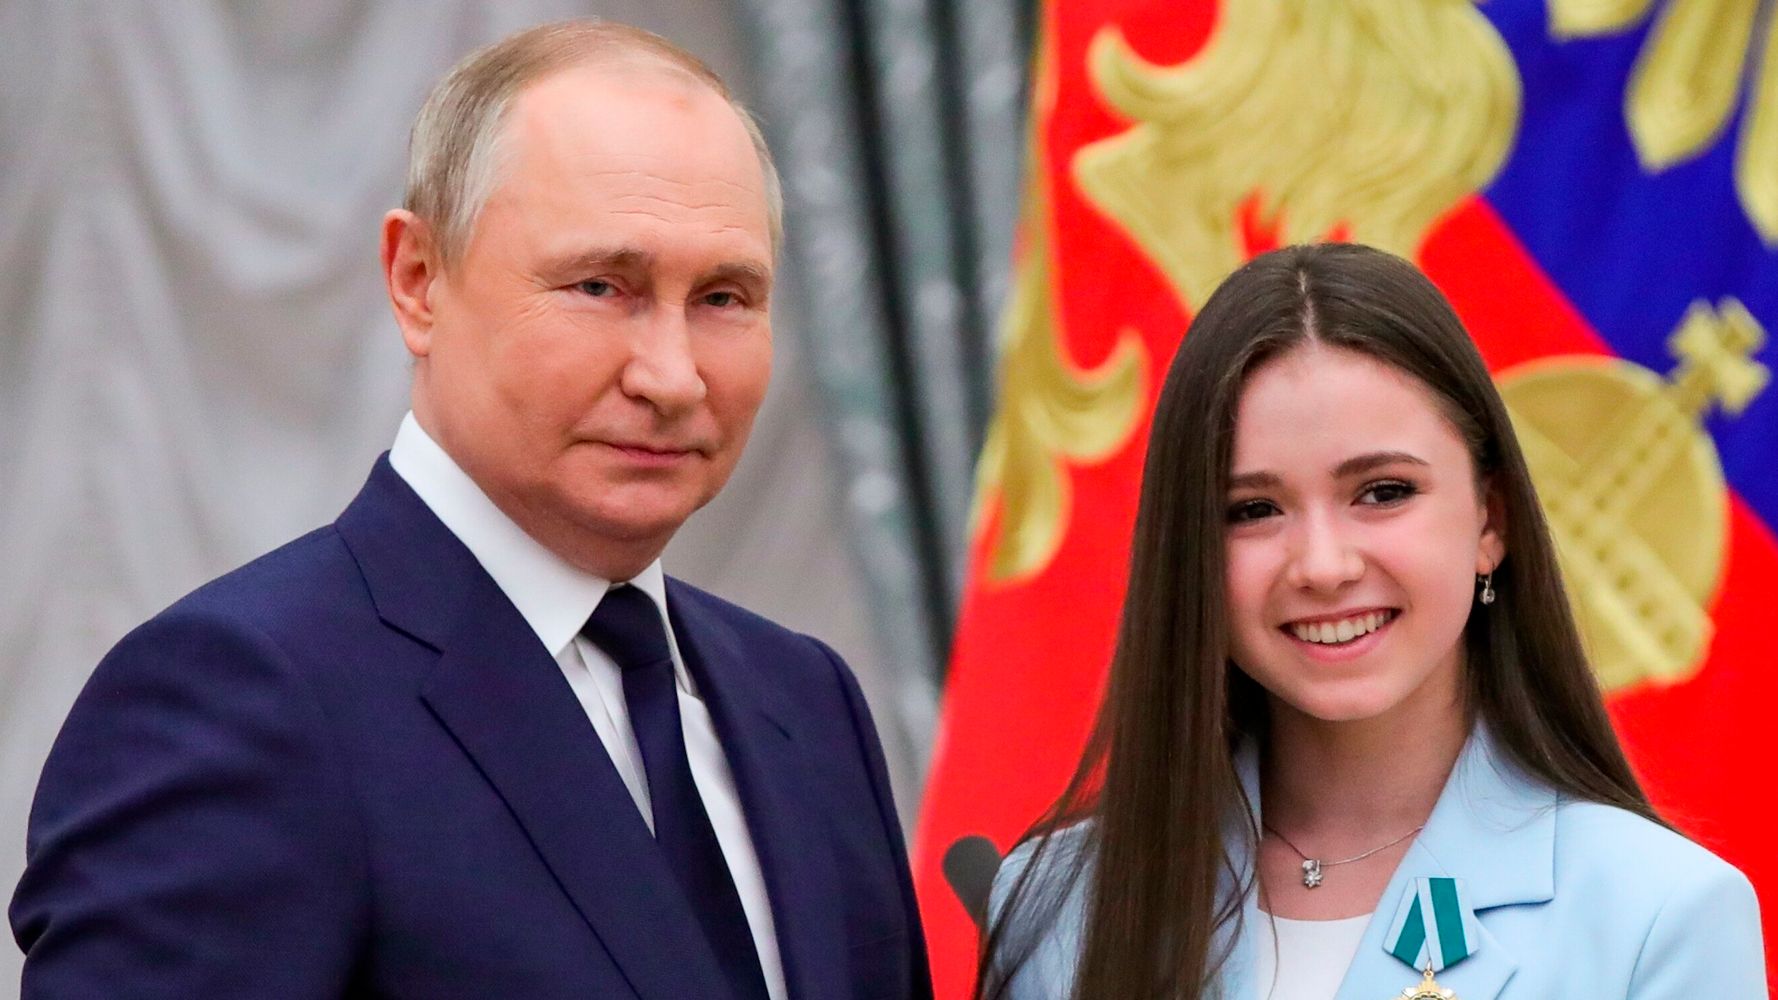 Putin Insists Olympic Skater Caught In Doping Scandal Didn't Compete 'Dishonestly'